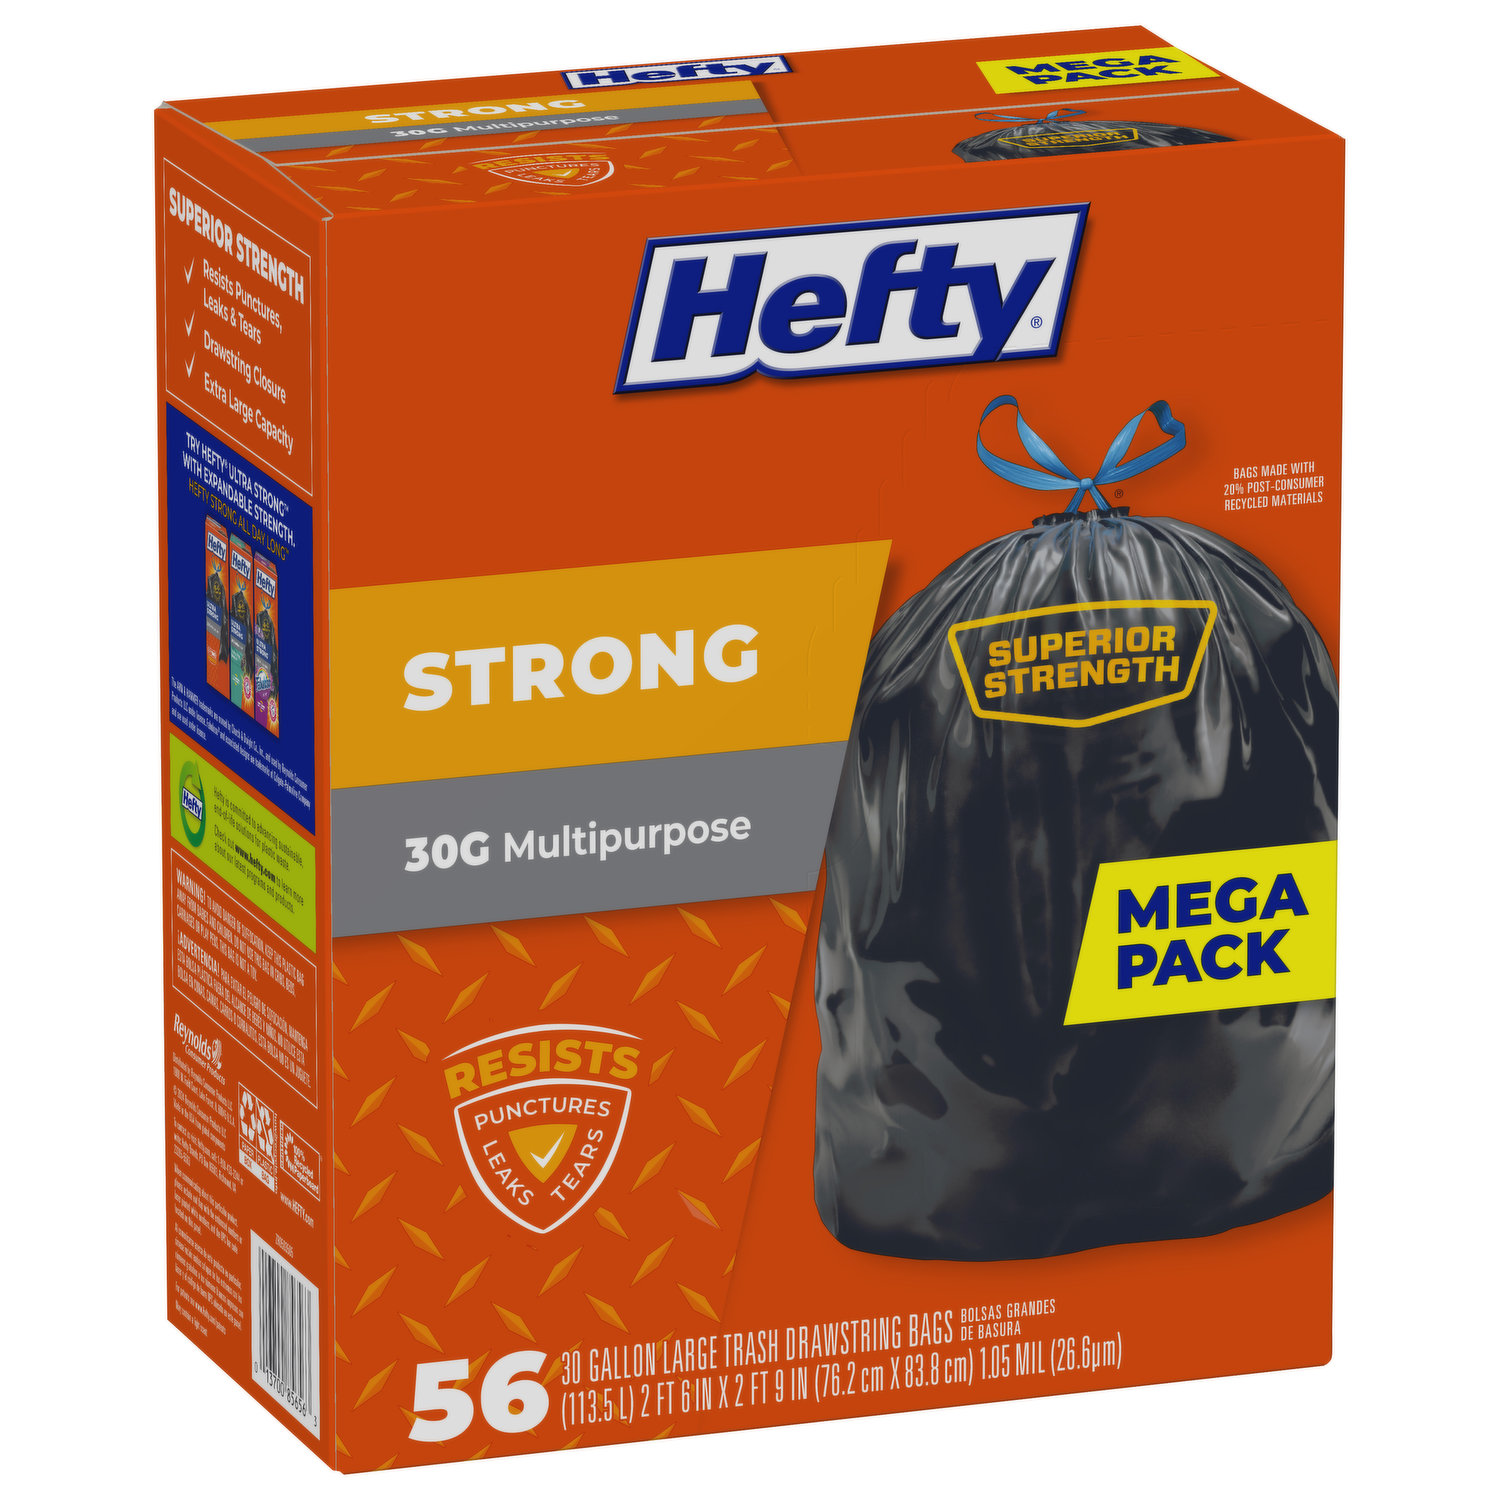 Hefty Strong Large Trash Bags, 30 Gallon, 56 Count 56 (Pack of 1)  13700856563